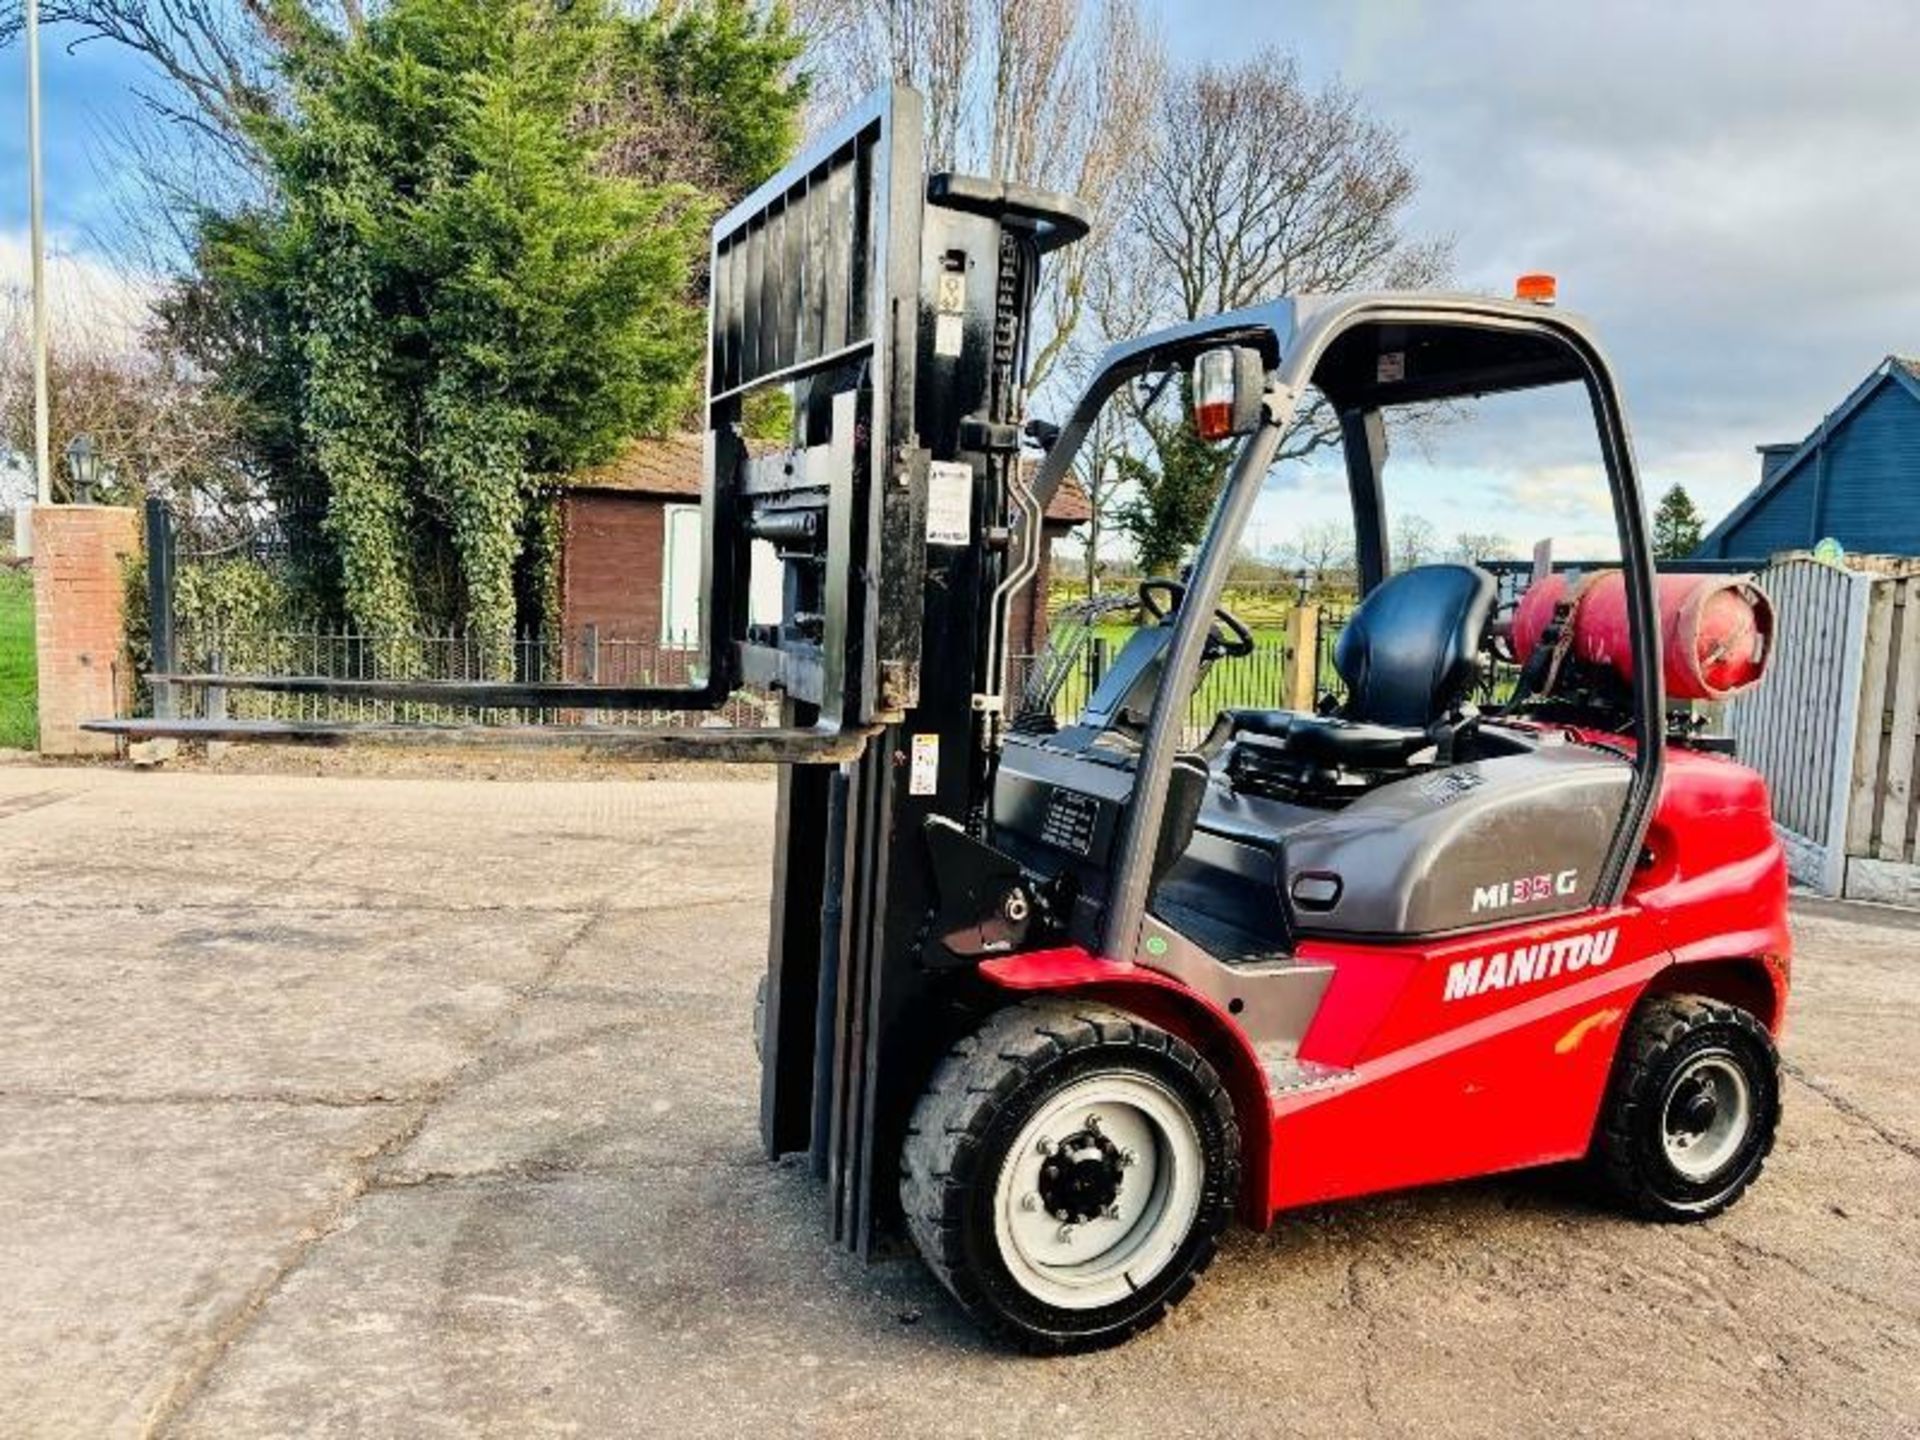 MANITOU MI35G CONTAINER SPEC FORKLIFT *YEAR 2016, 2070 HOURS* C/W SIDE SHIFT - Image 2 of 18